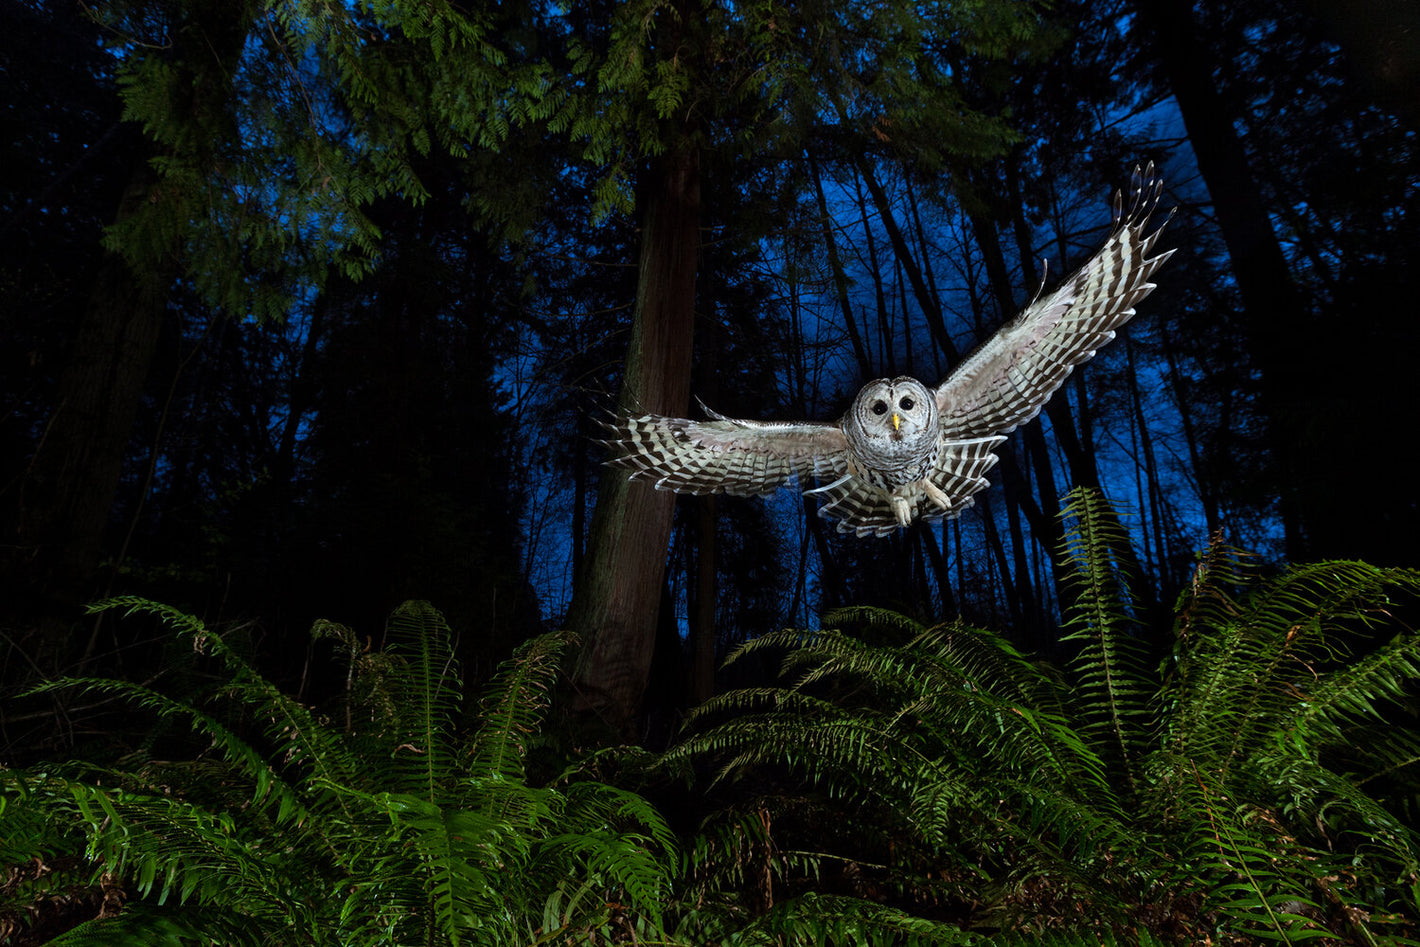 The Flight Path photo of a barred owl in flight by professional nature photographer Connor Stefanison who won the Eric Hosing Portfolio Award